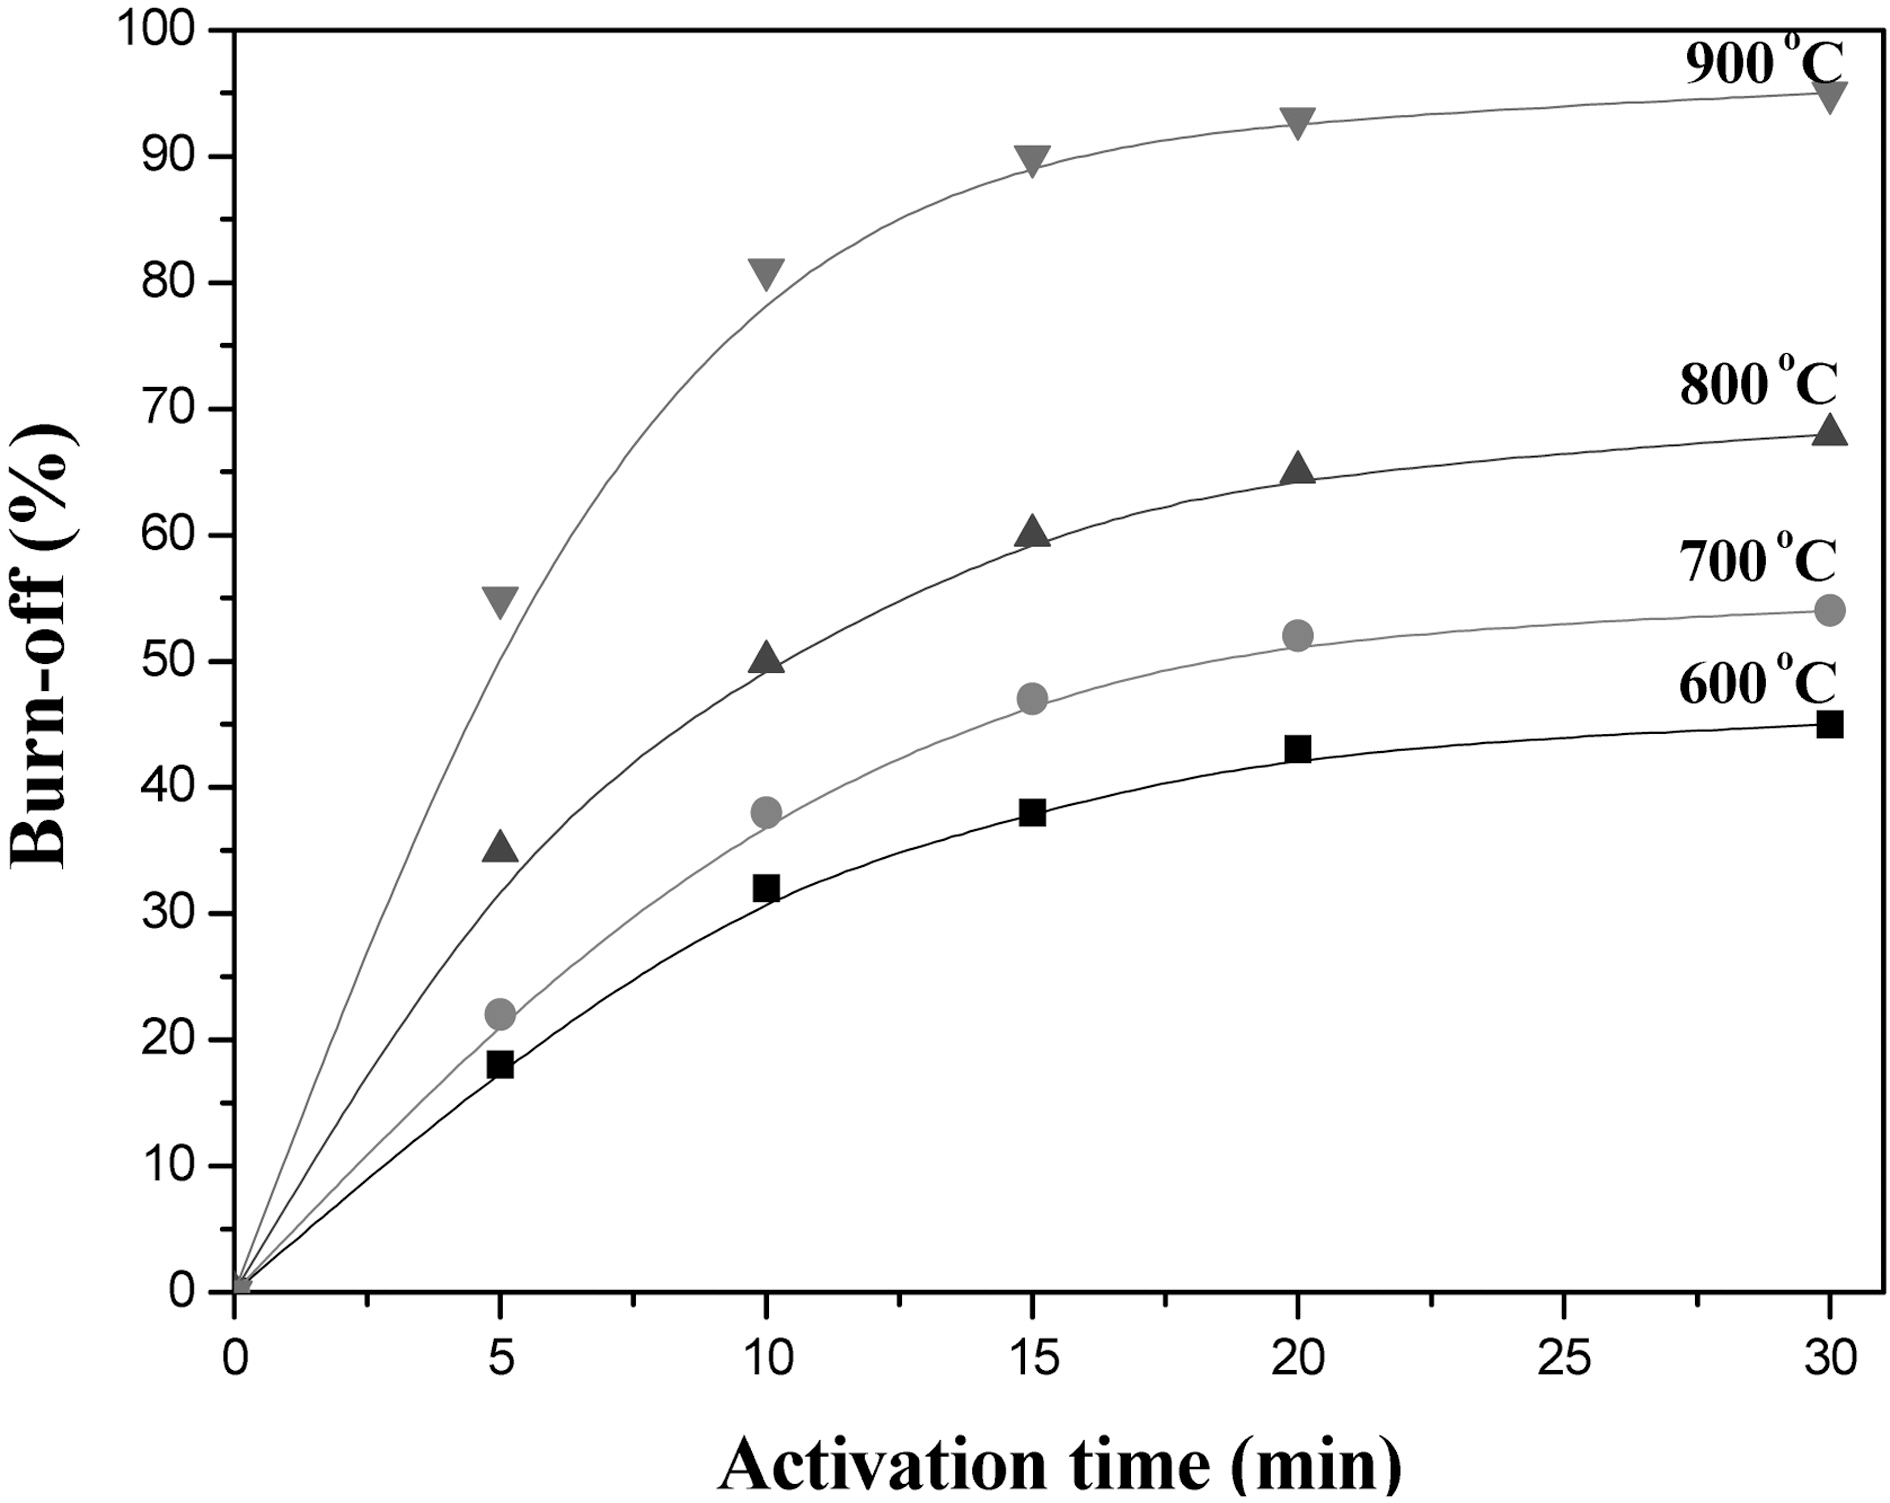 Burn-offs of carbonized henequen fibers (800℃ 1 hr) as a function of activation temperature in the stream of 0.45 H2O/N2 (v/v).